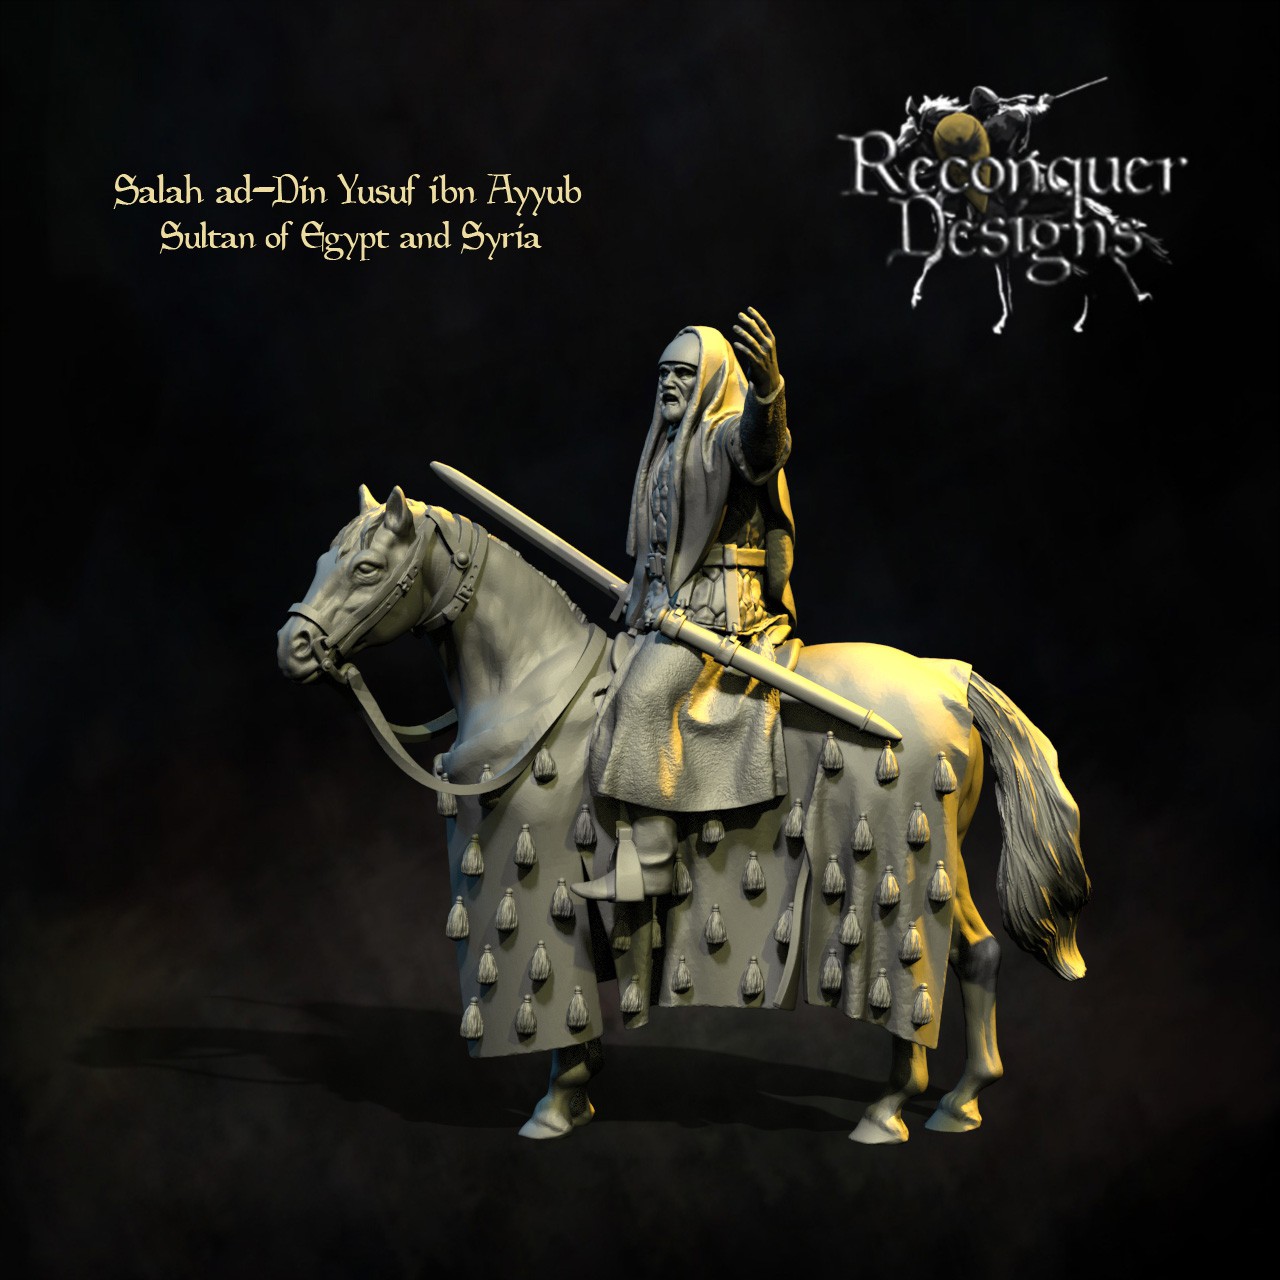 Reconquer Designs RD-073 Saladin - Sultan of Egypt and Syria 1